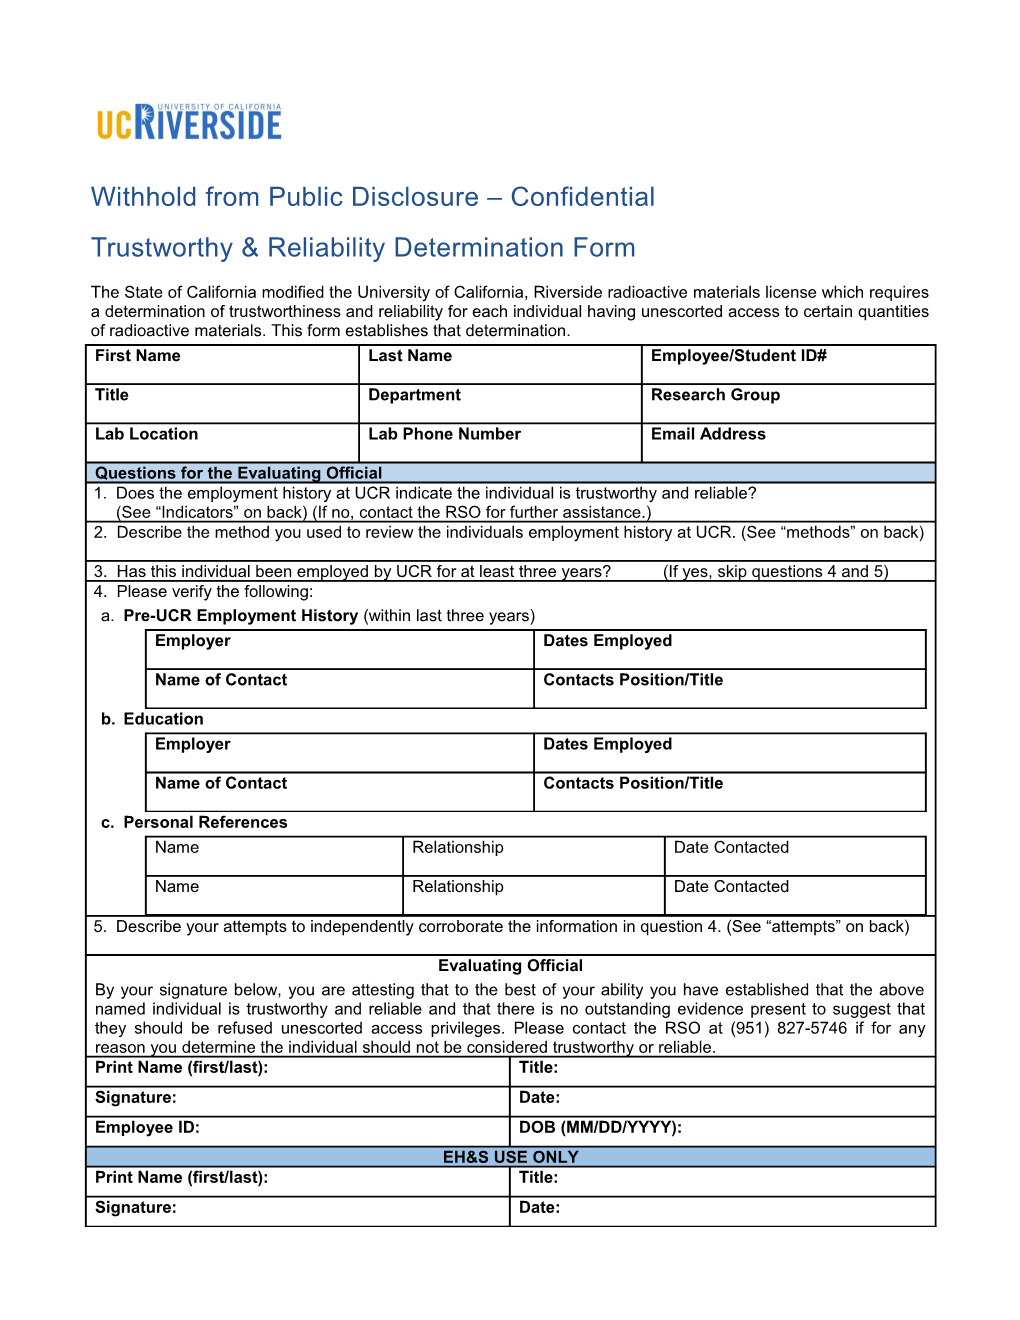 Withhold from Public Disclosure Confidential